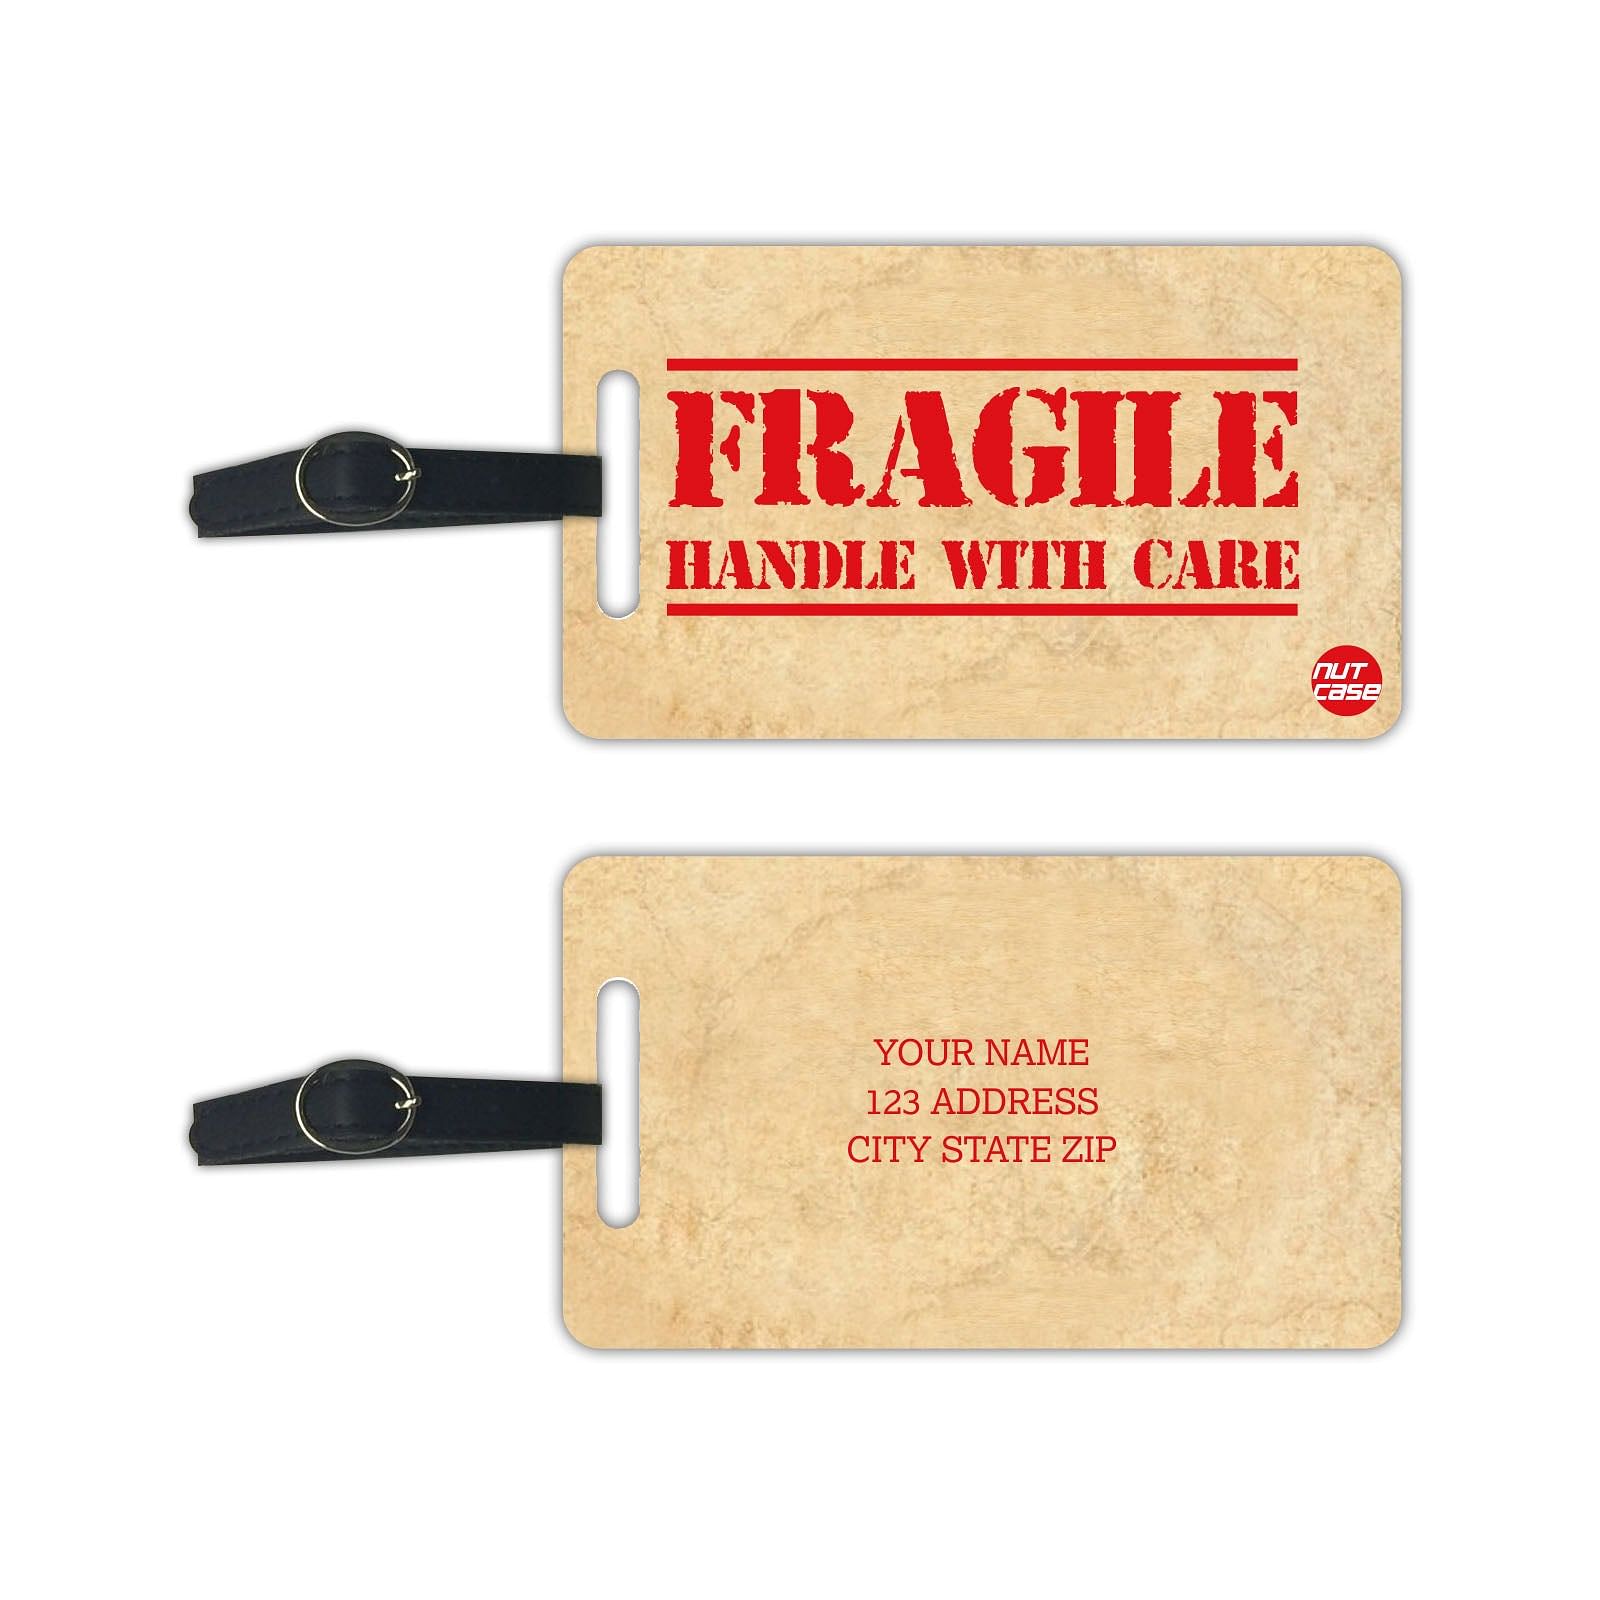  Custom Luggage Tags,Personalized Luggage Tags,Travel